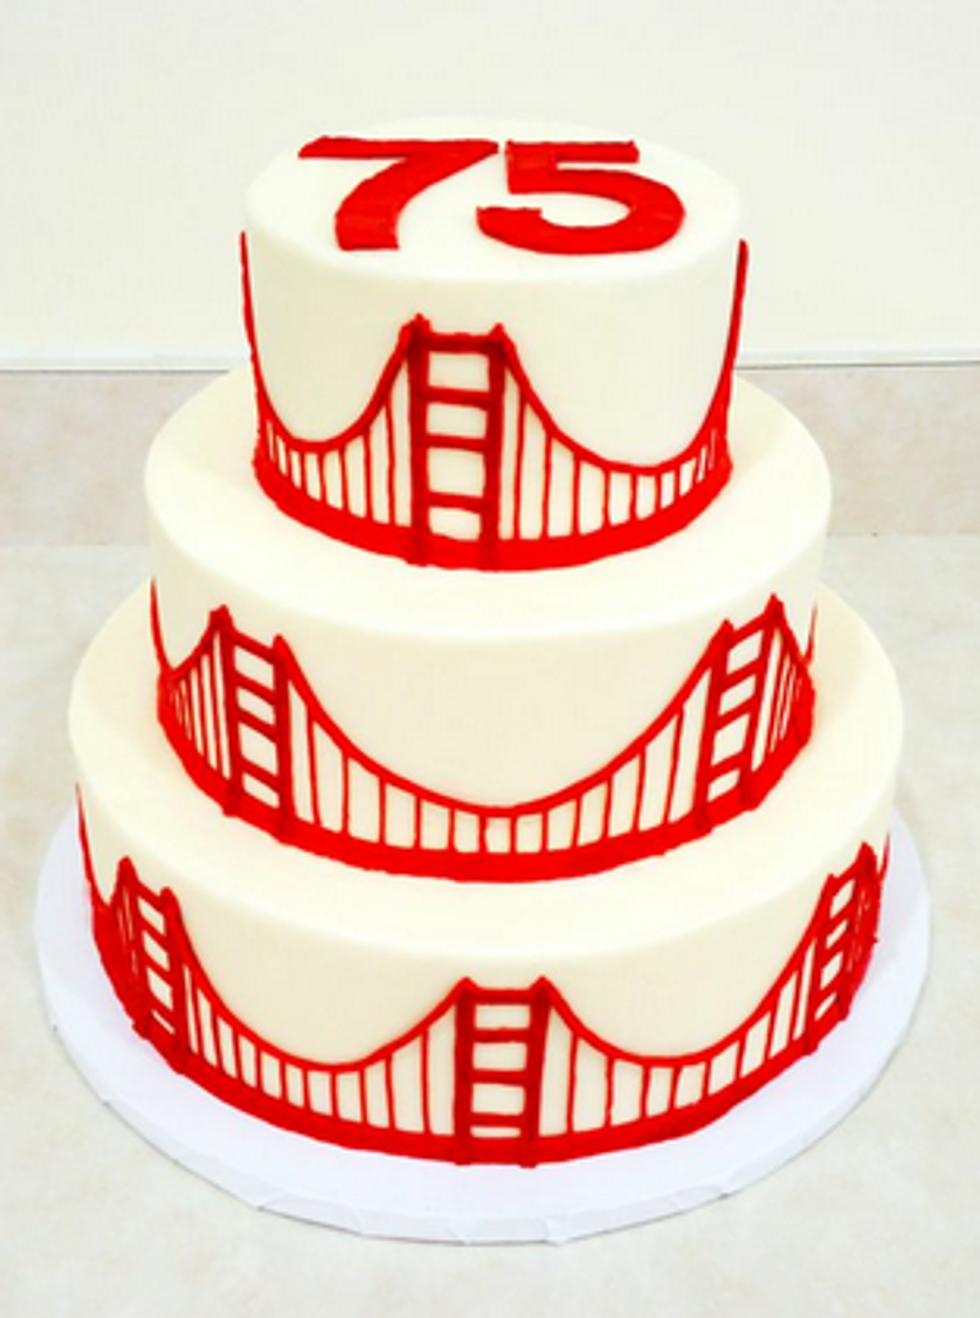 A Guide to Food at Sunday's Golden Gate Bridge Anniversary Celebration